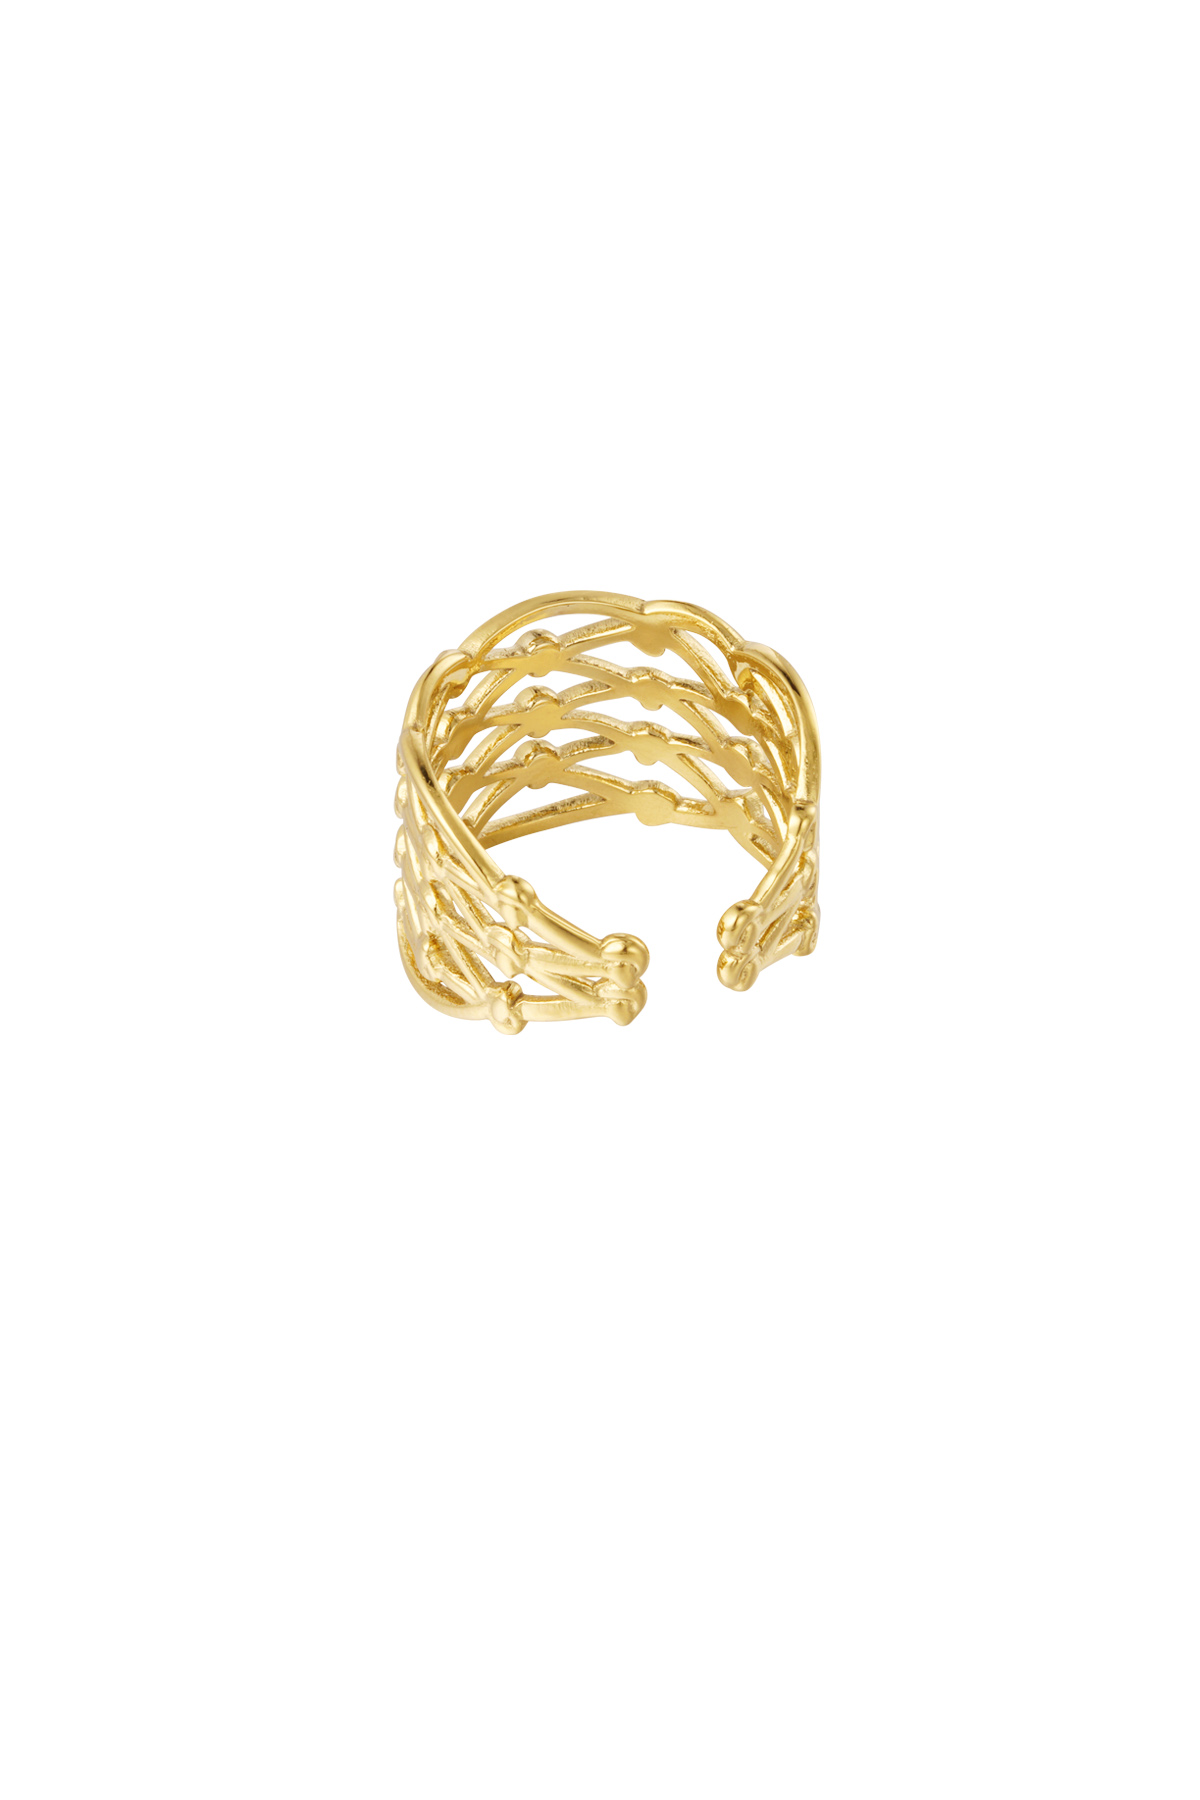 Ring with knot twist - gold Picture2